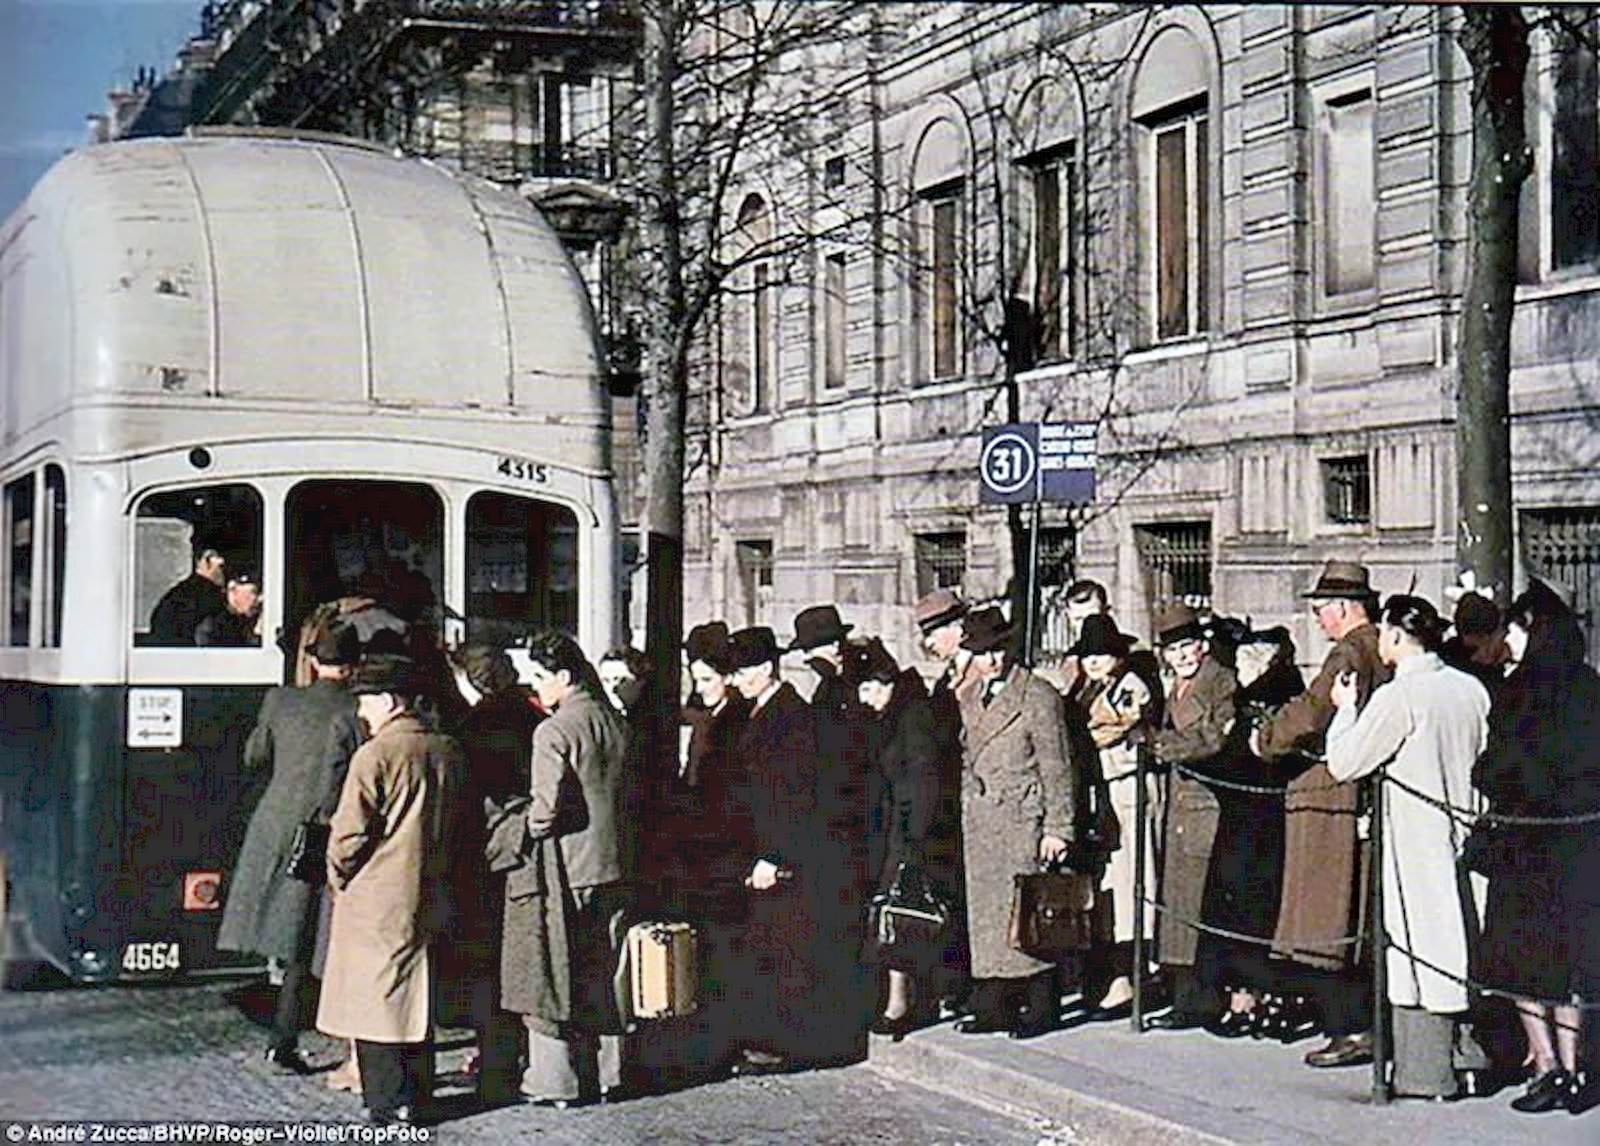 Parisian commuters queue to board a bus on a chilly early morning.